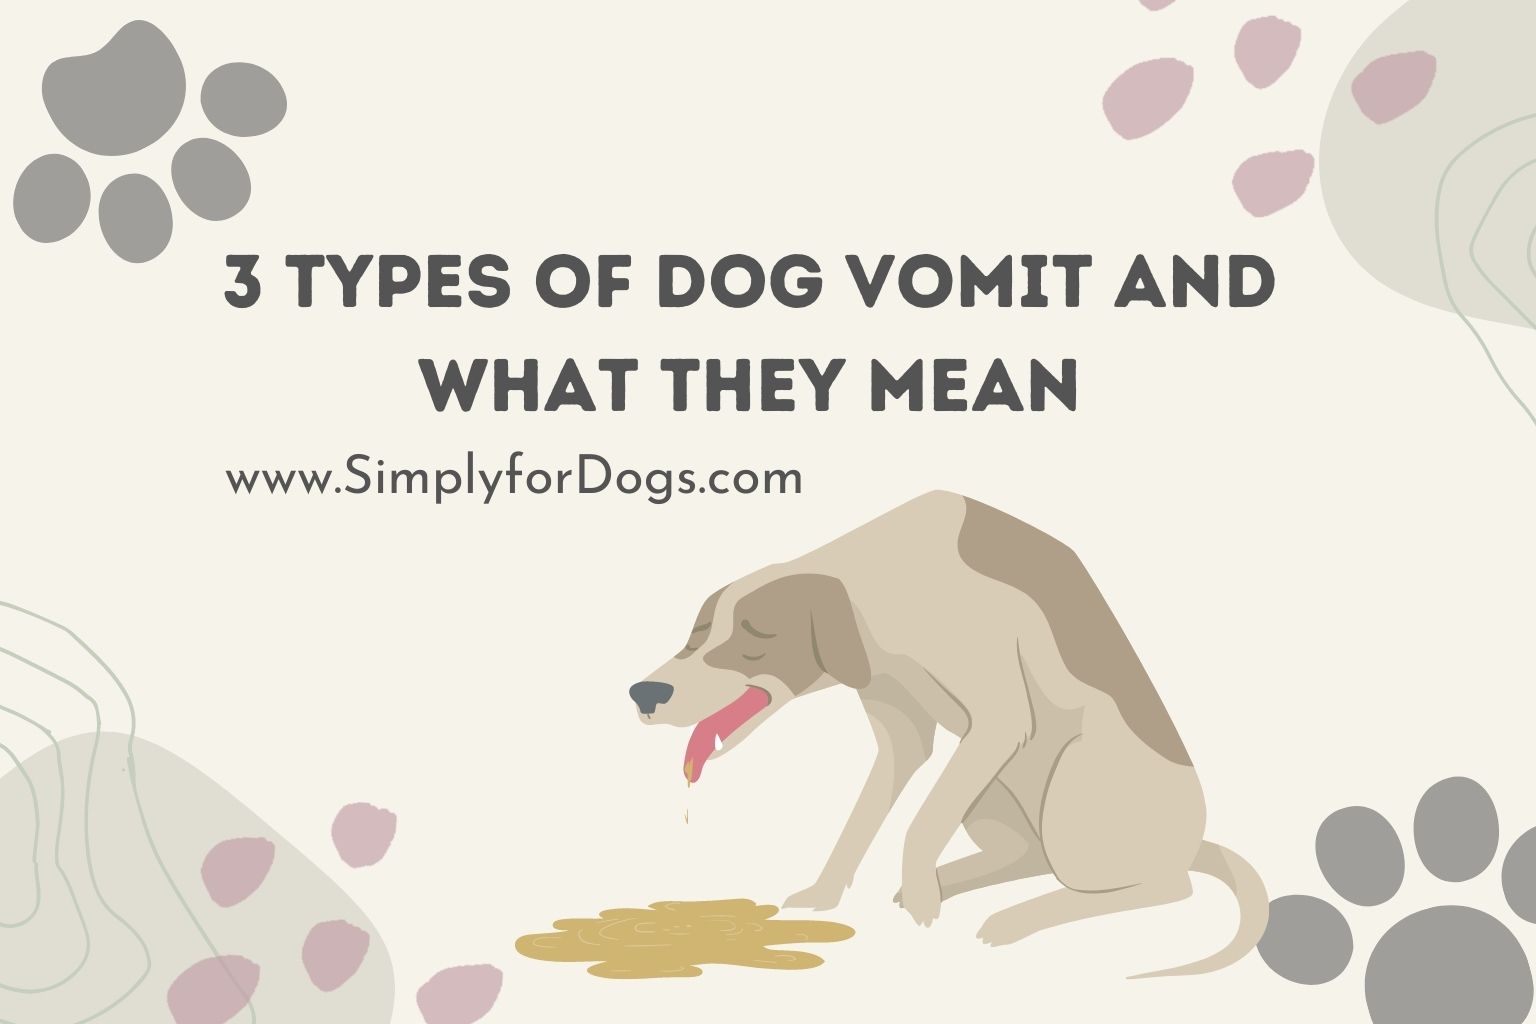 3 Types of Dog Vomit and What They Mean